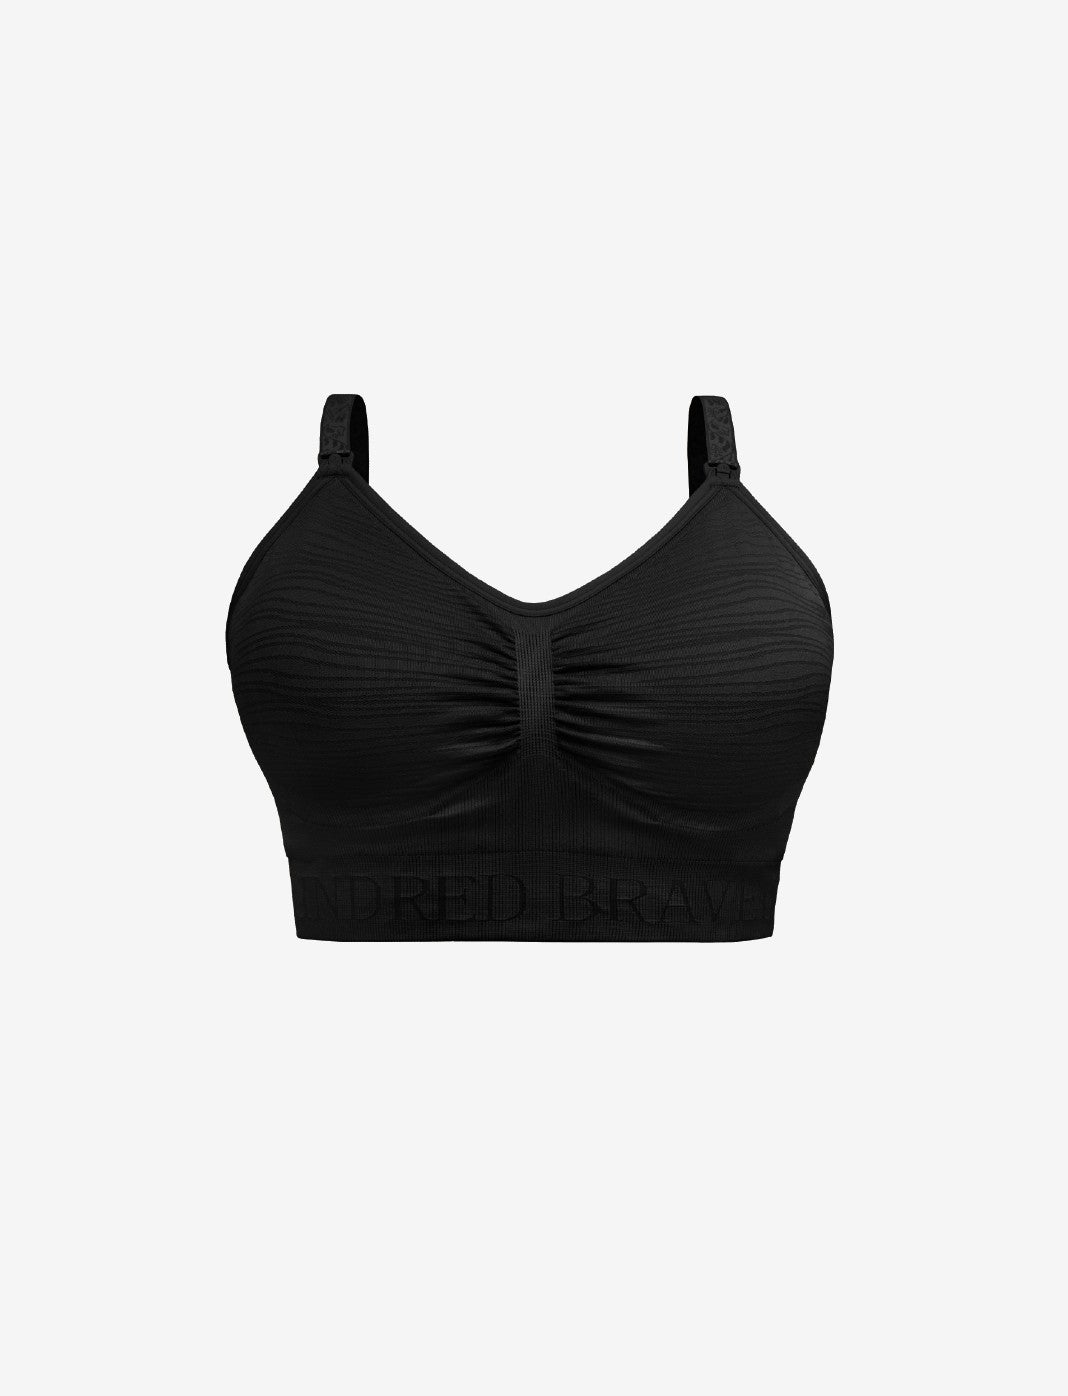 Convertible Sublime Hands-Free Pumping Bra – Village Maternity